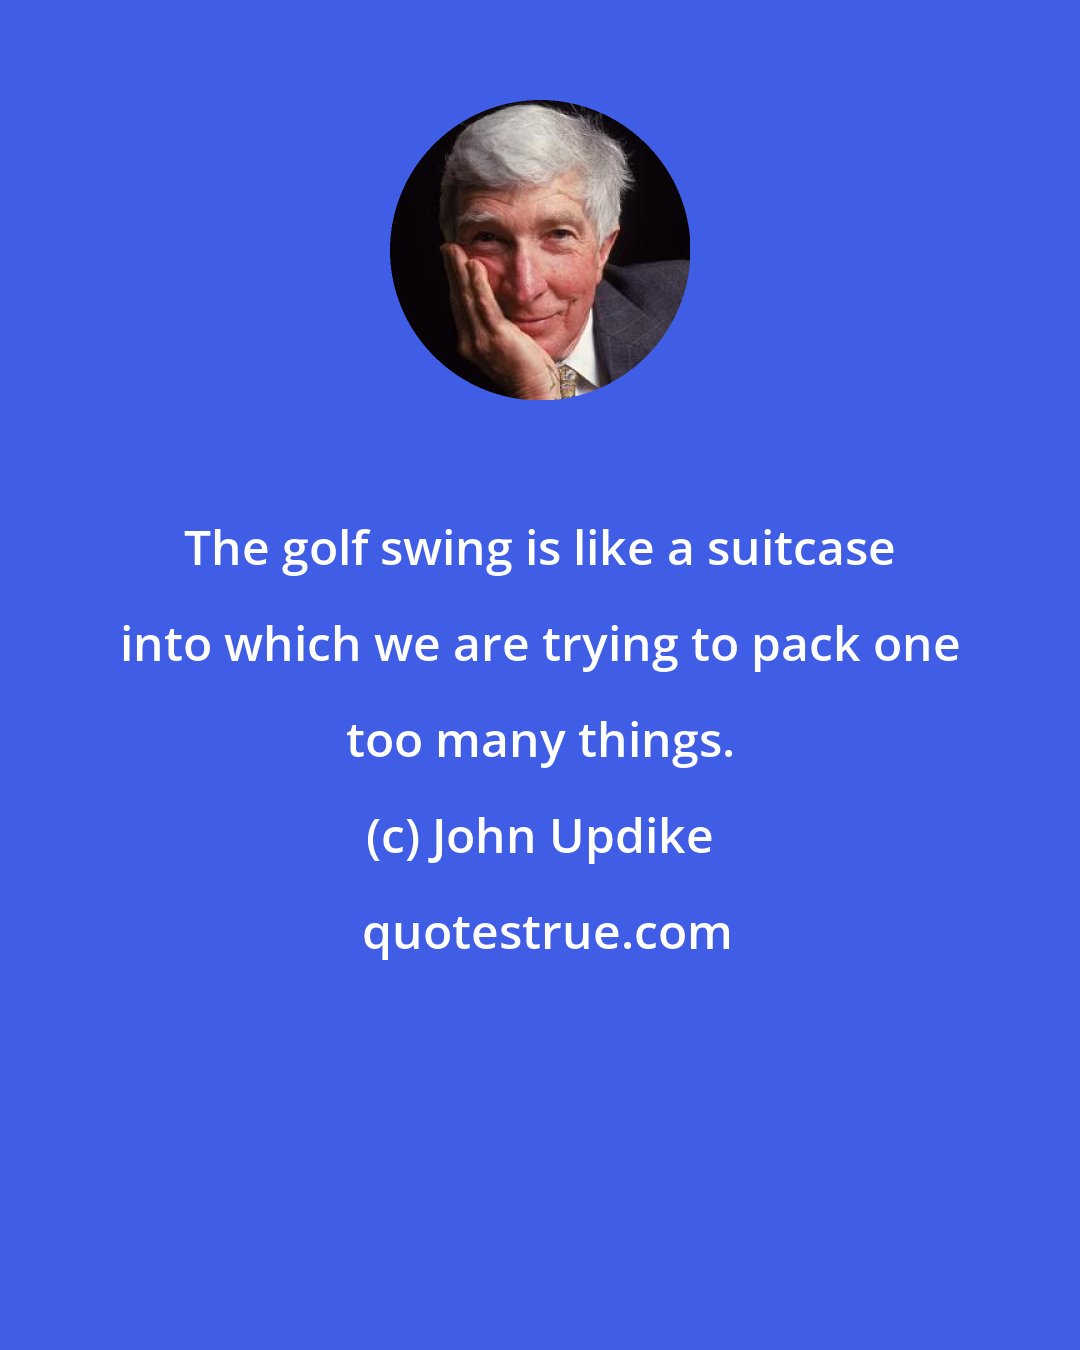 John Updike: The golf swing is like a suitcase into which we are trying to pack one too many things.